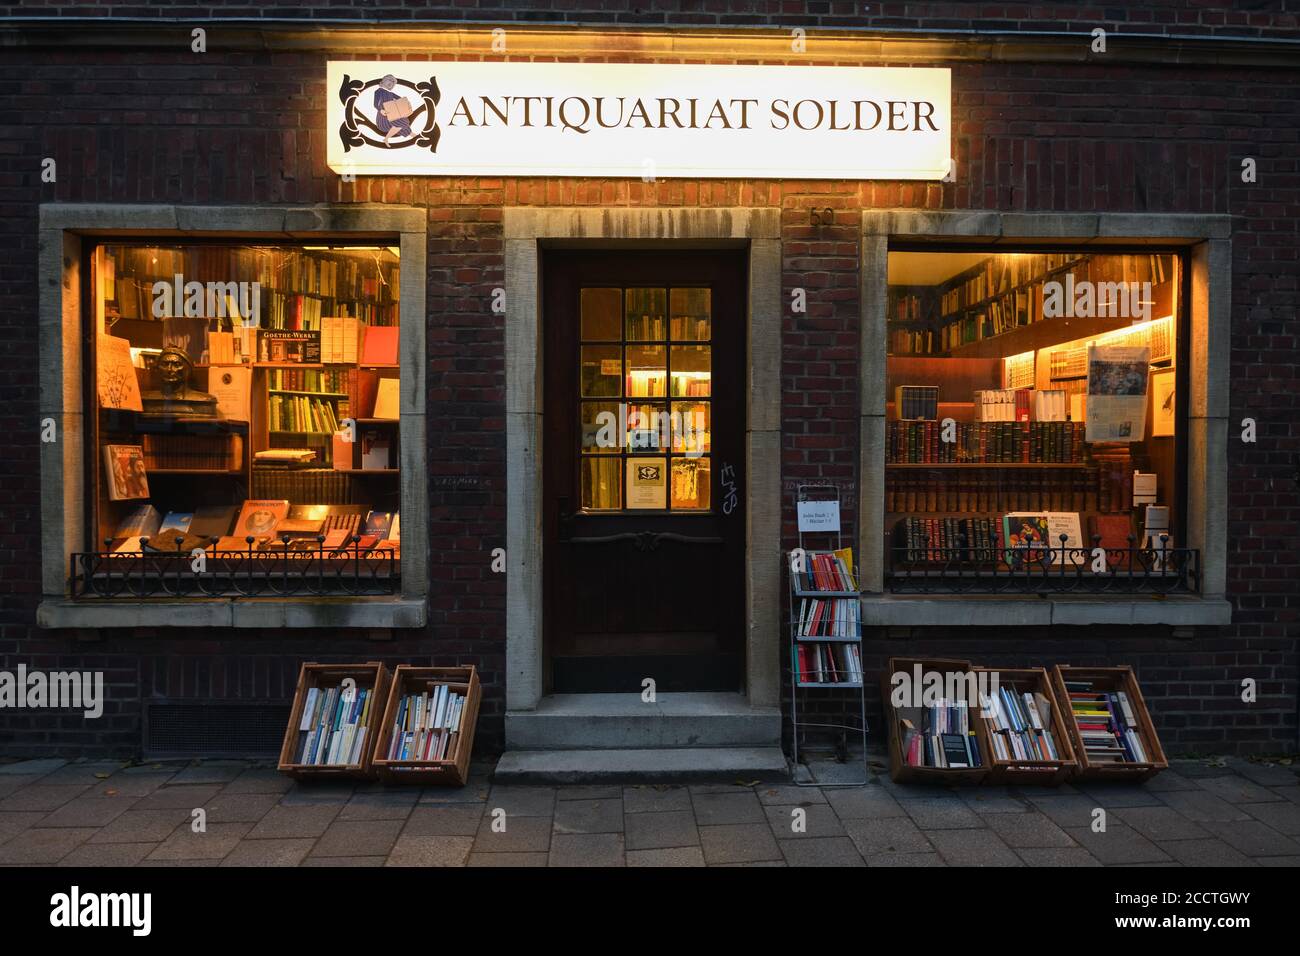 Muenster, second hand bookstore, antiquarian bookshop Solder, well known filming location of Wilsberg crime film in the city of Münster, Germany, Euro Stock Photo